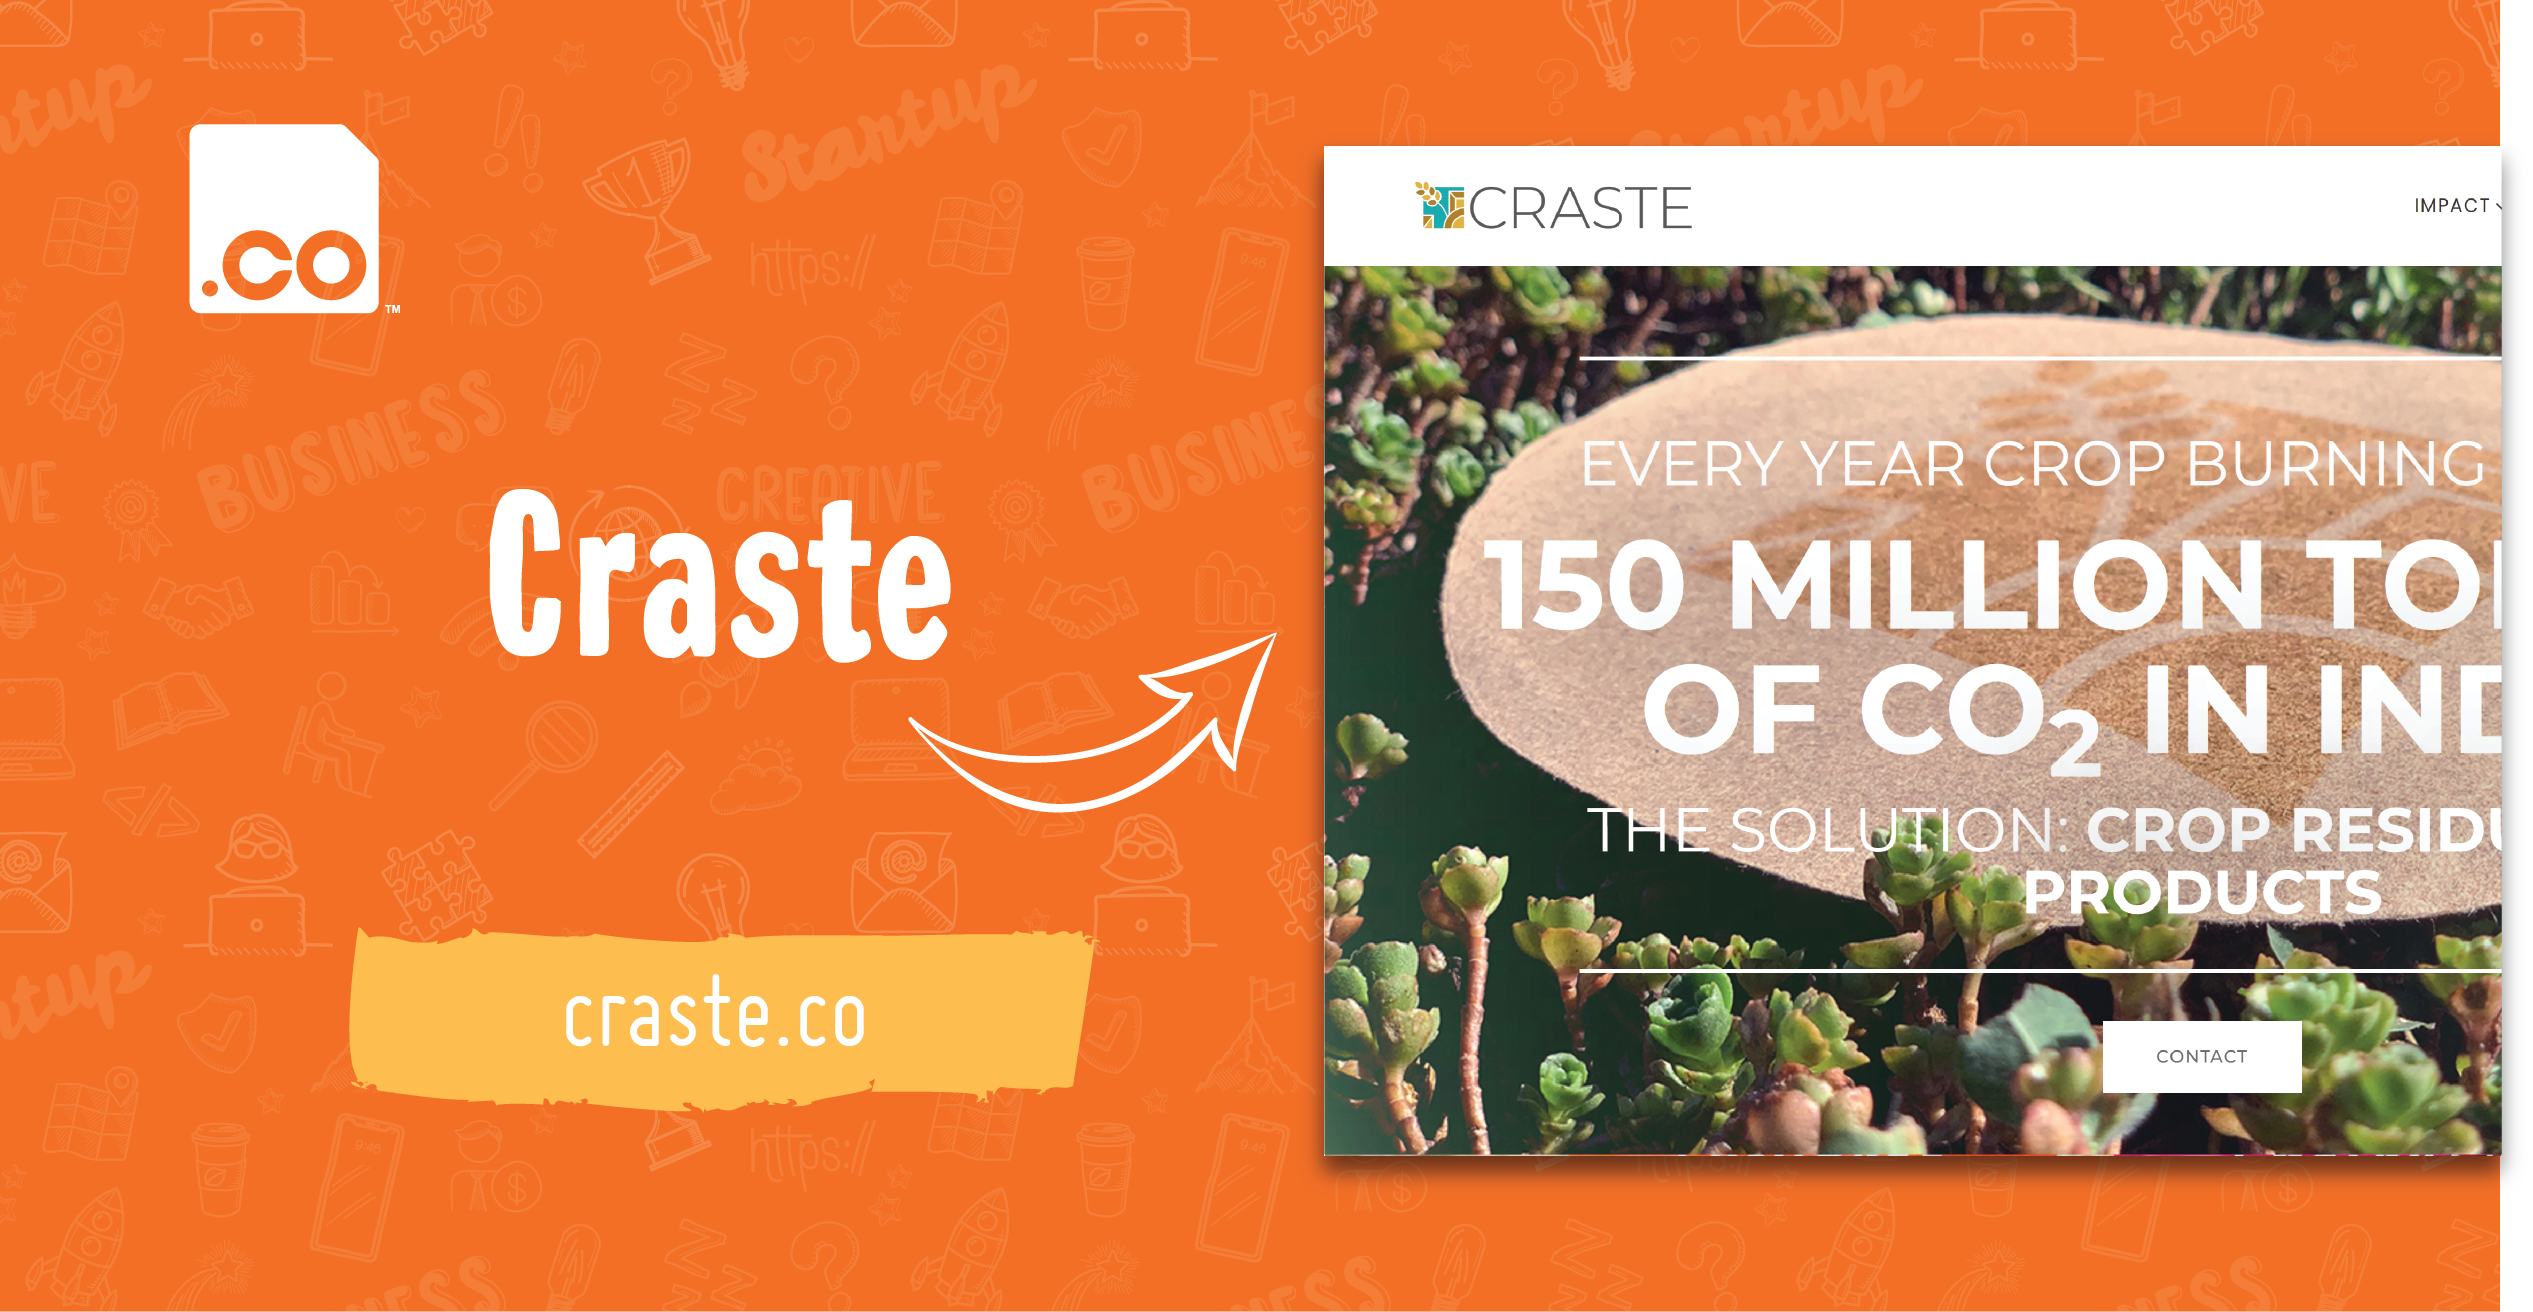 How Eco-Friendly Ventures Like Craste.co Can Have a Huge Impact